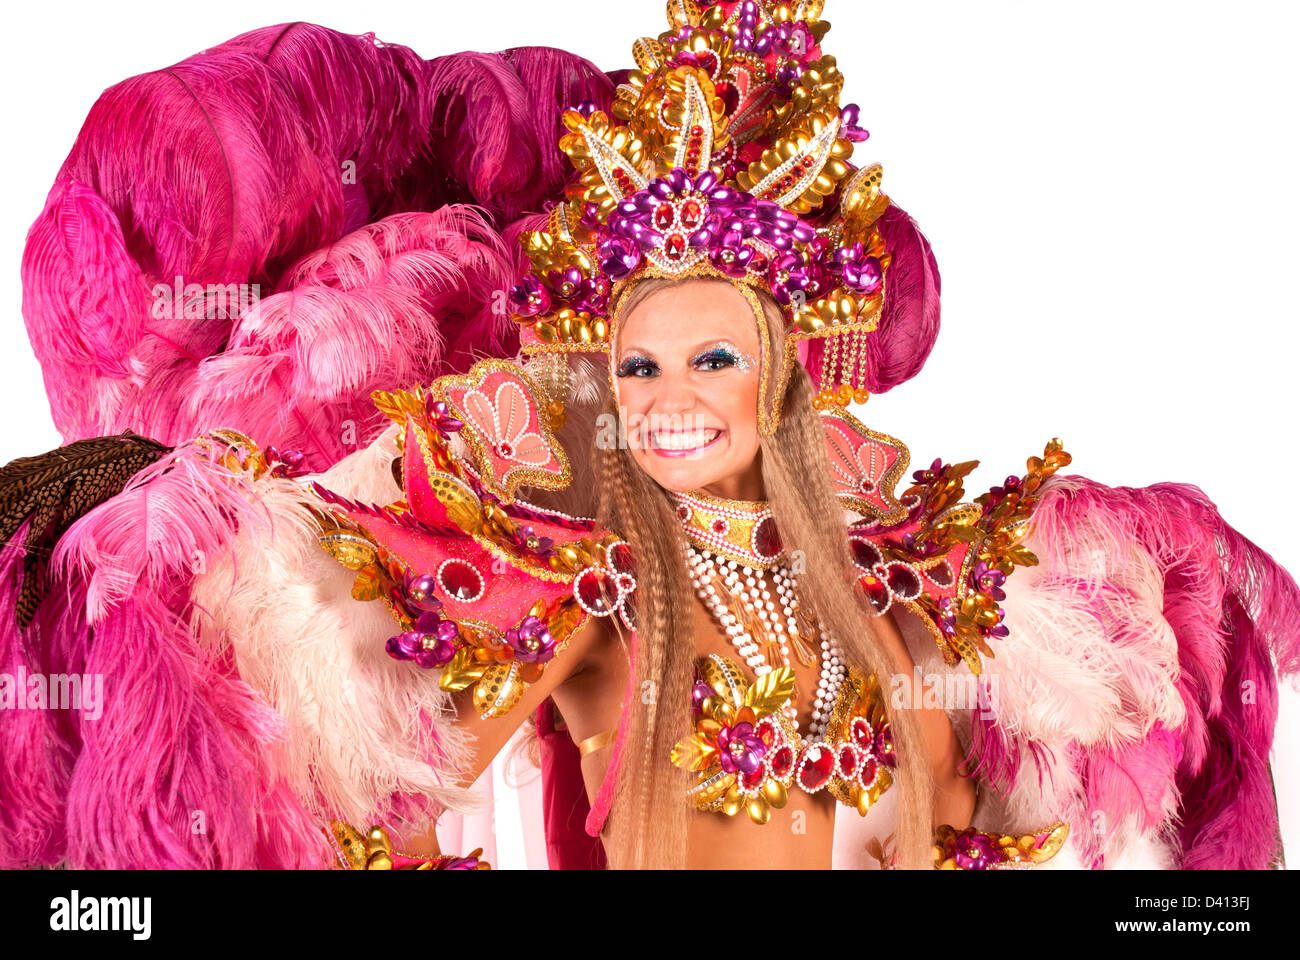 Portrait of young woman in pink carnival costume, close up against white background Stock Photo